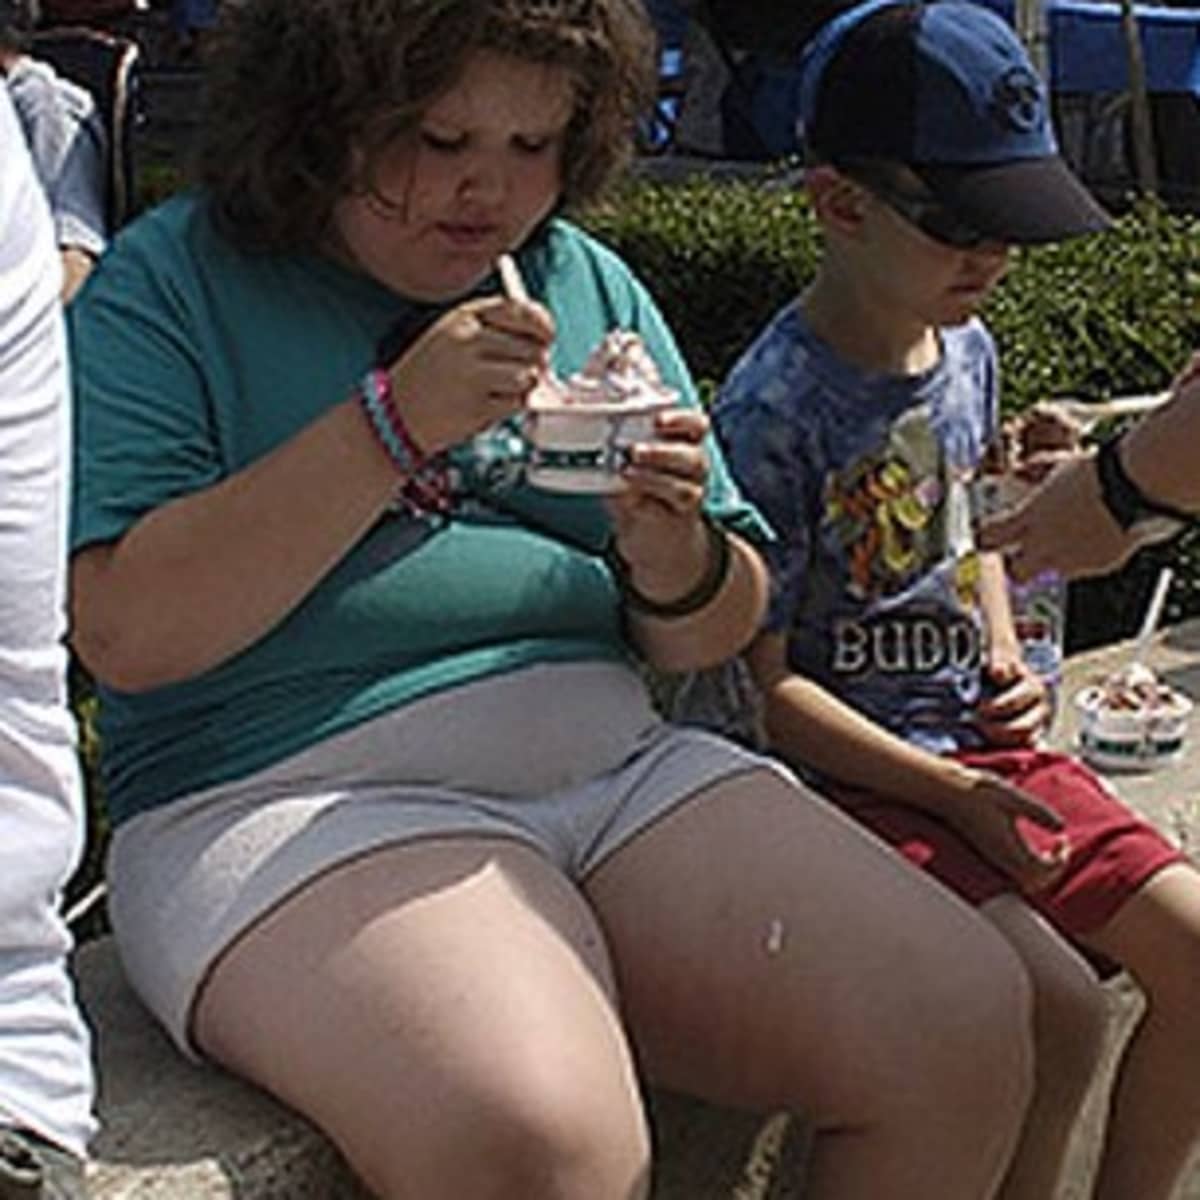 Should Young Chubby Children Be Put on a Diet? - HubPages